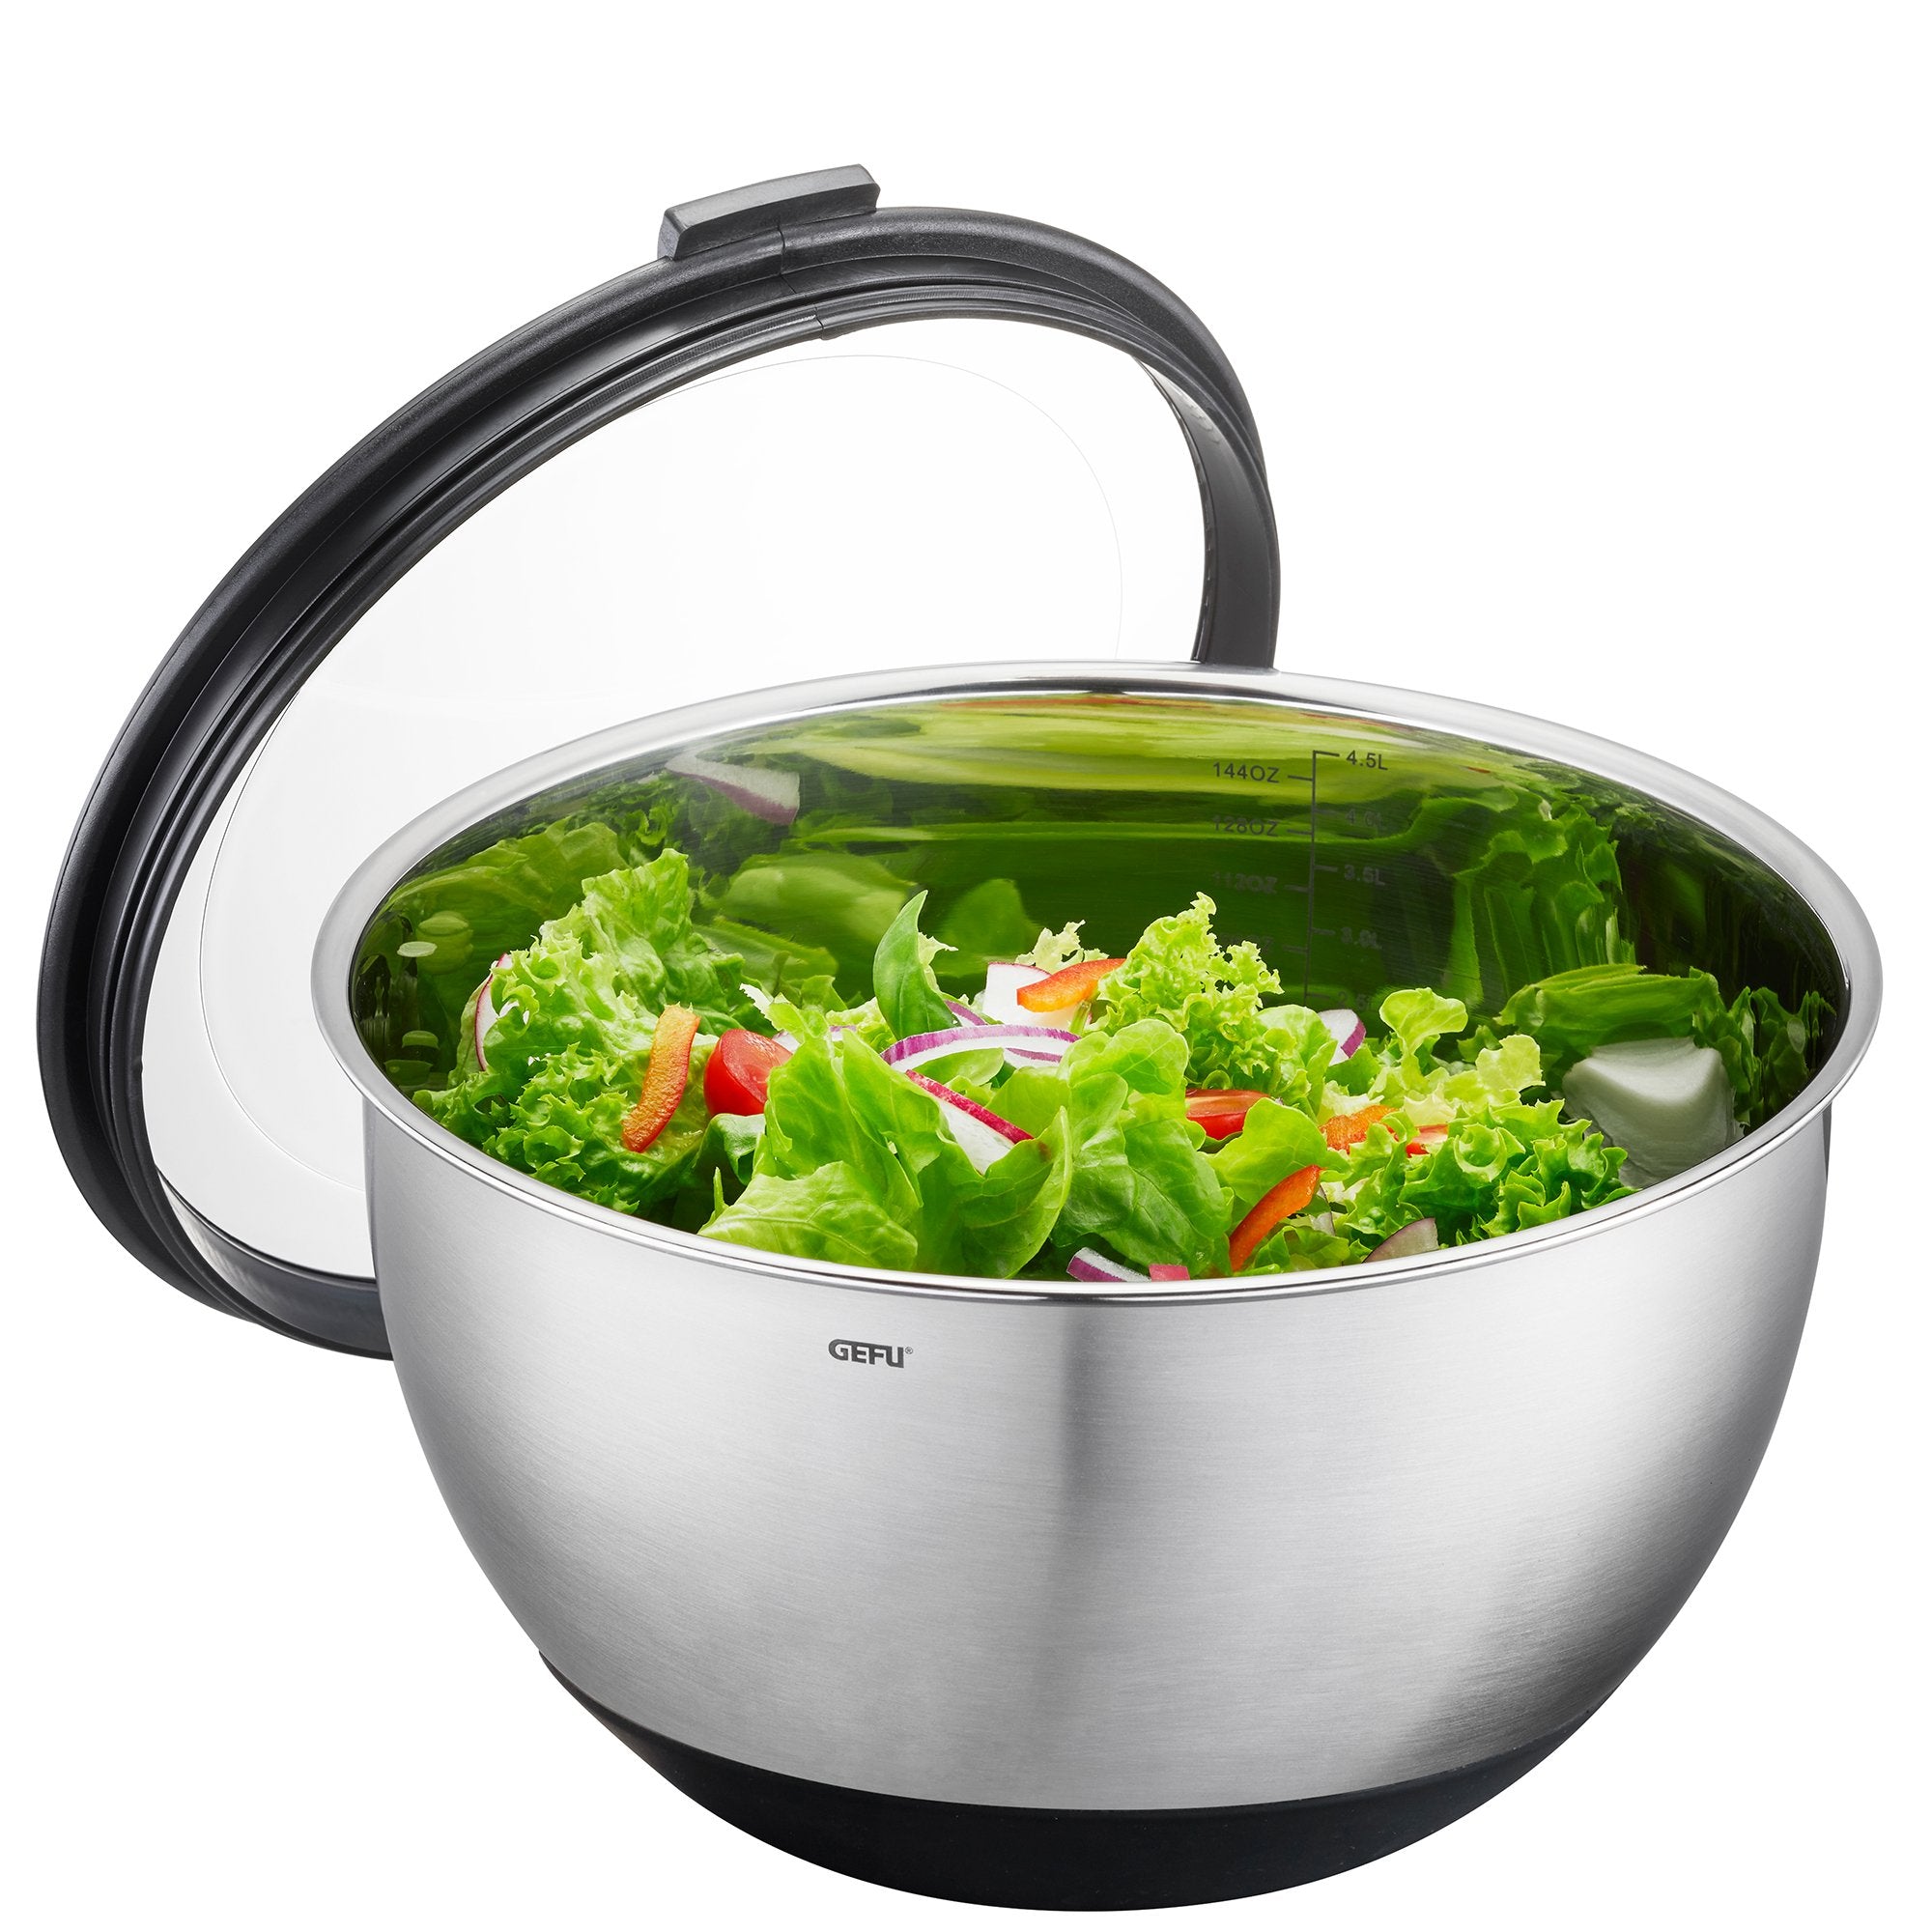 GEFU Stainless Steel Bowl Muovo, Ã˜ 24 Cm - Whole and All